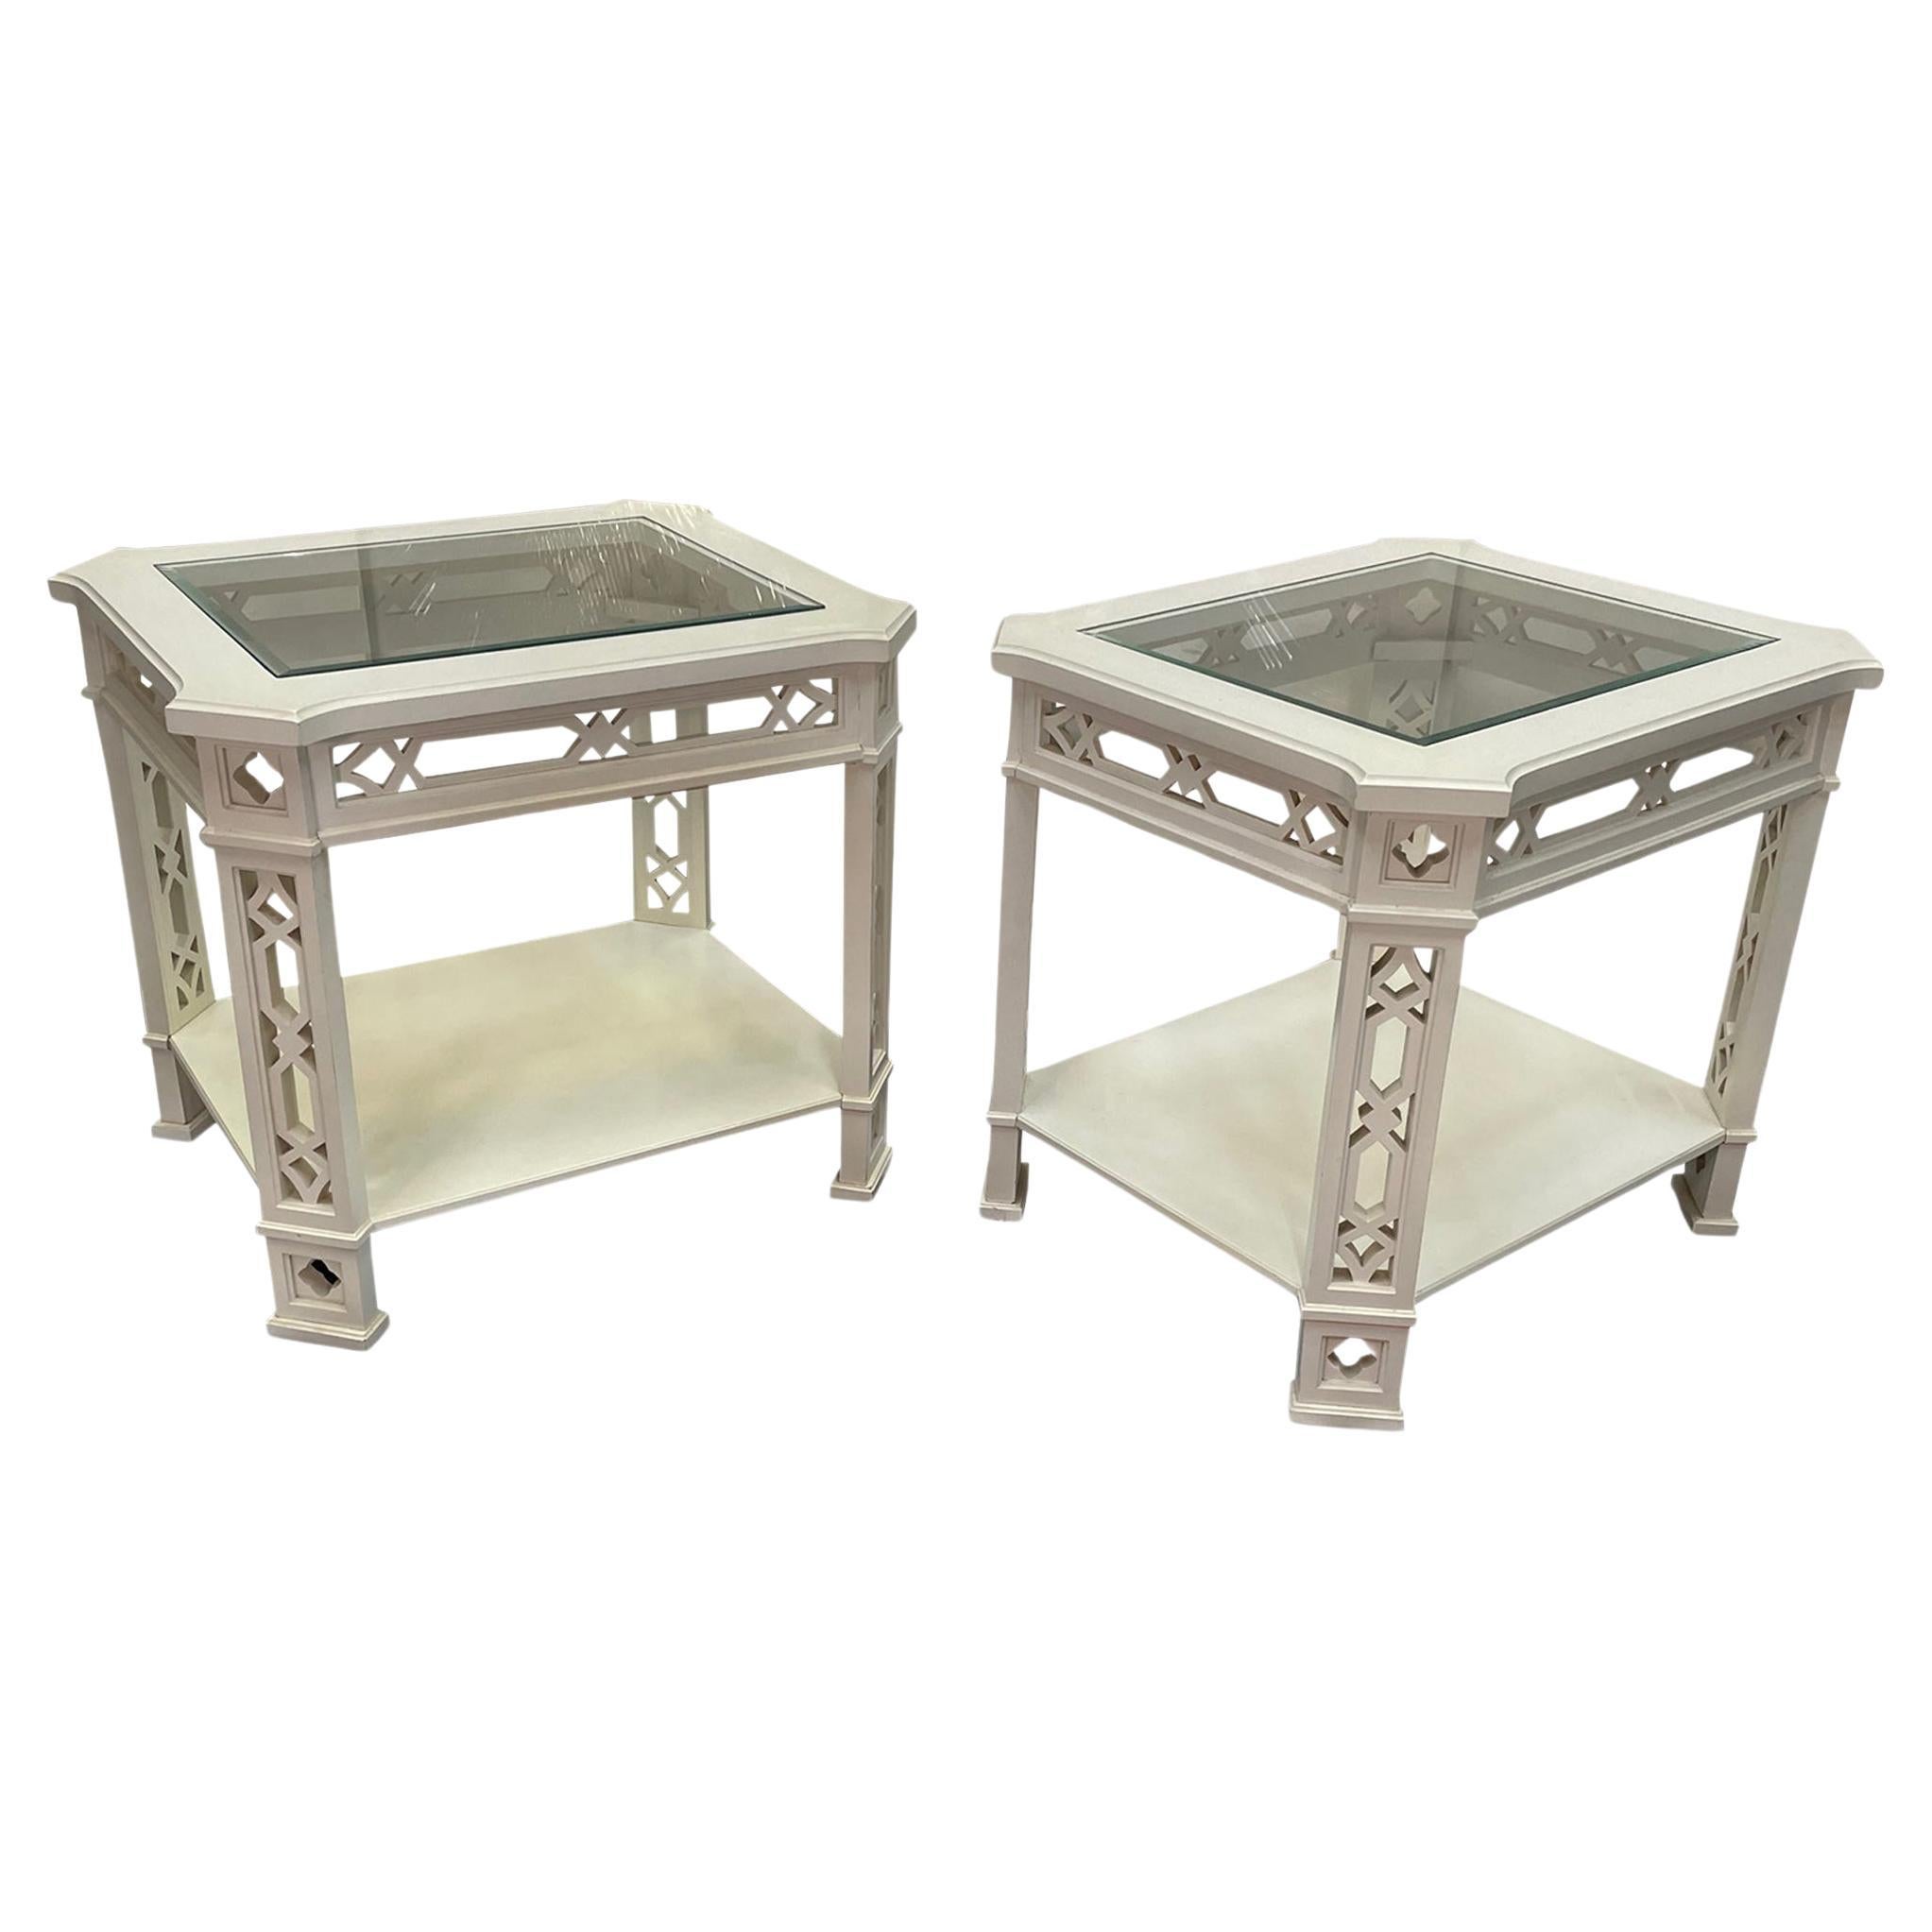 Ornate Carved Wood Fretwork End Tables by Thomasville For Sale